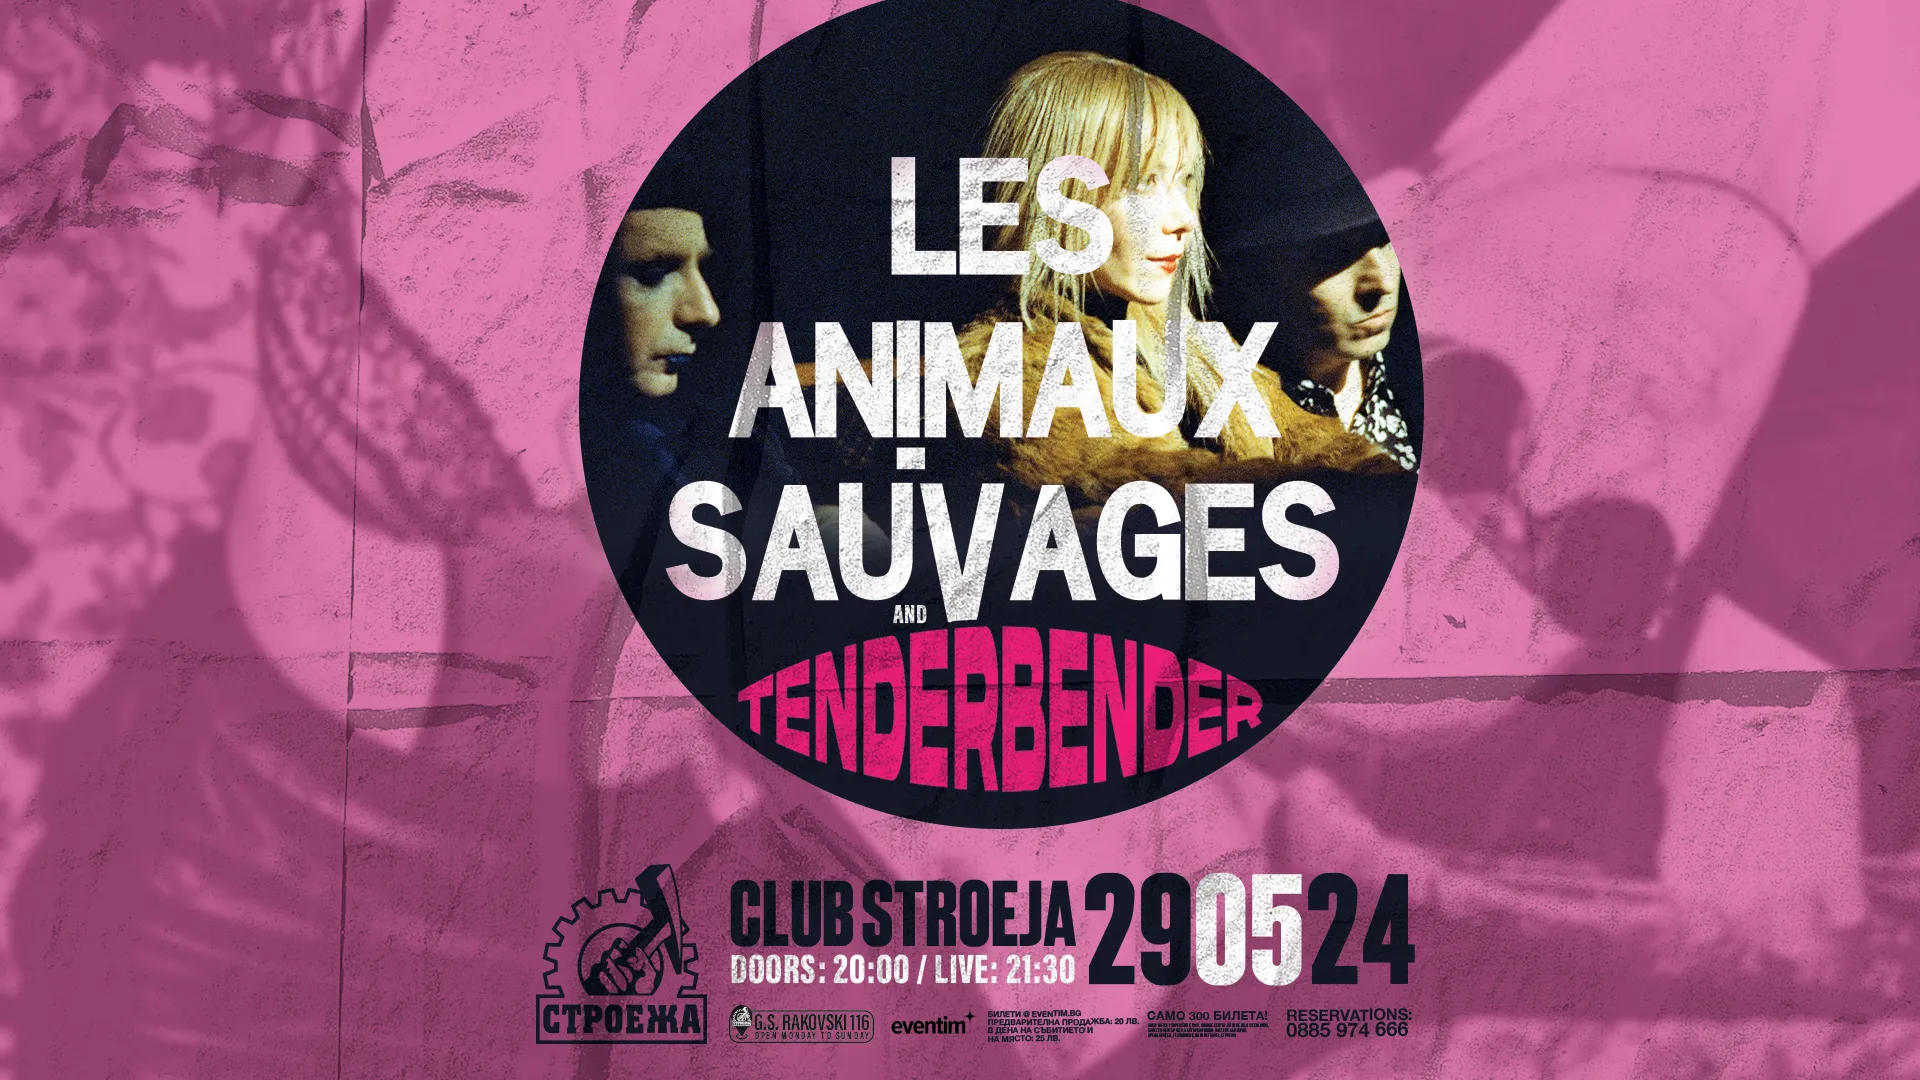 Les Animaux Sauvages Tenderbender